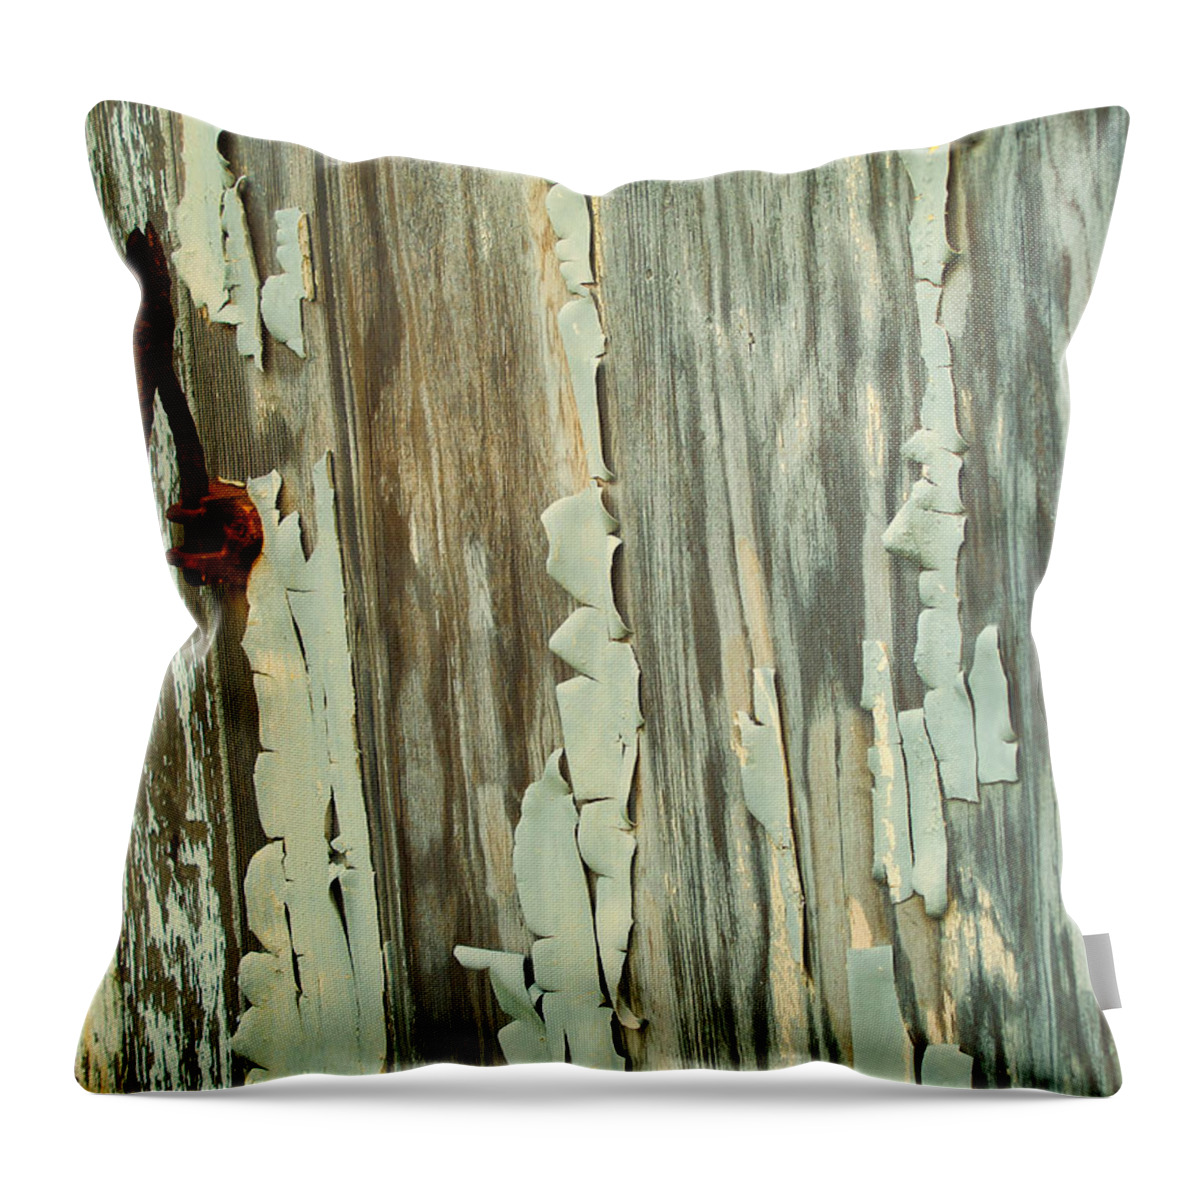 Peeling Throw Pillow featuring the photograph The Peeling Wall by Tom Gresham